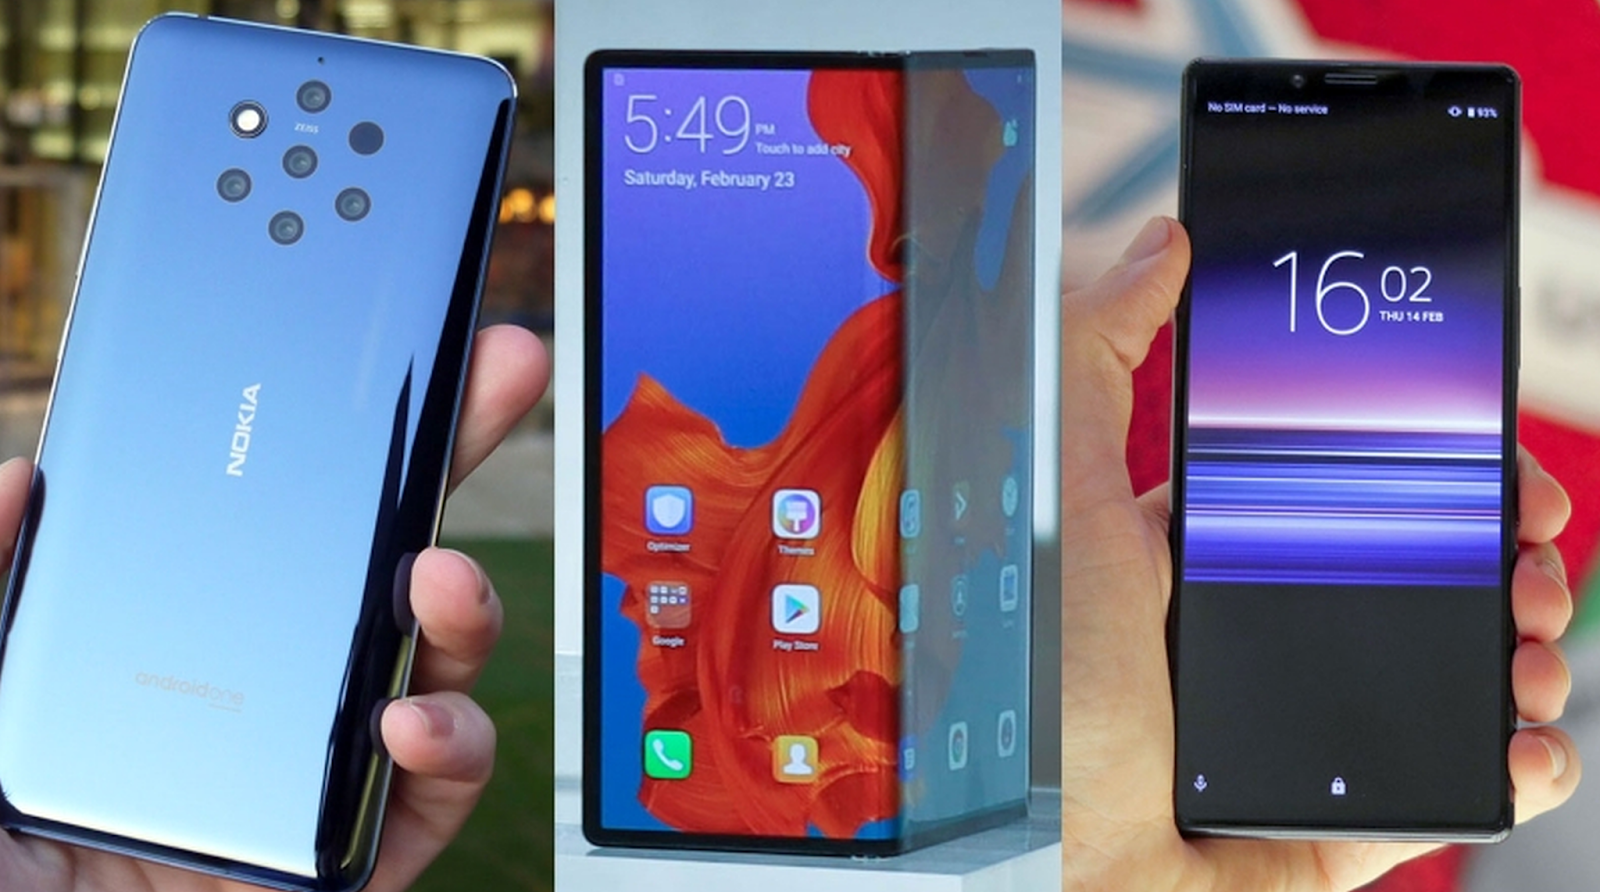 Best Gaming Phones at MWC 2019 | Manual and Tutorial